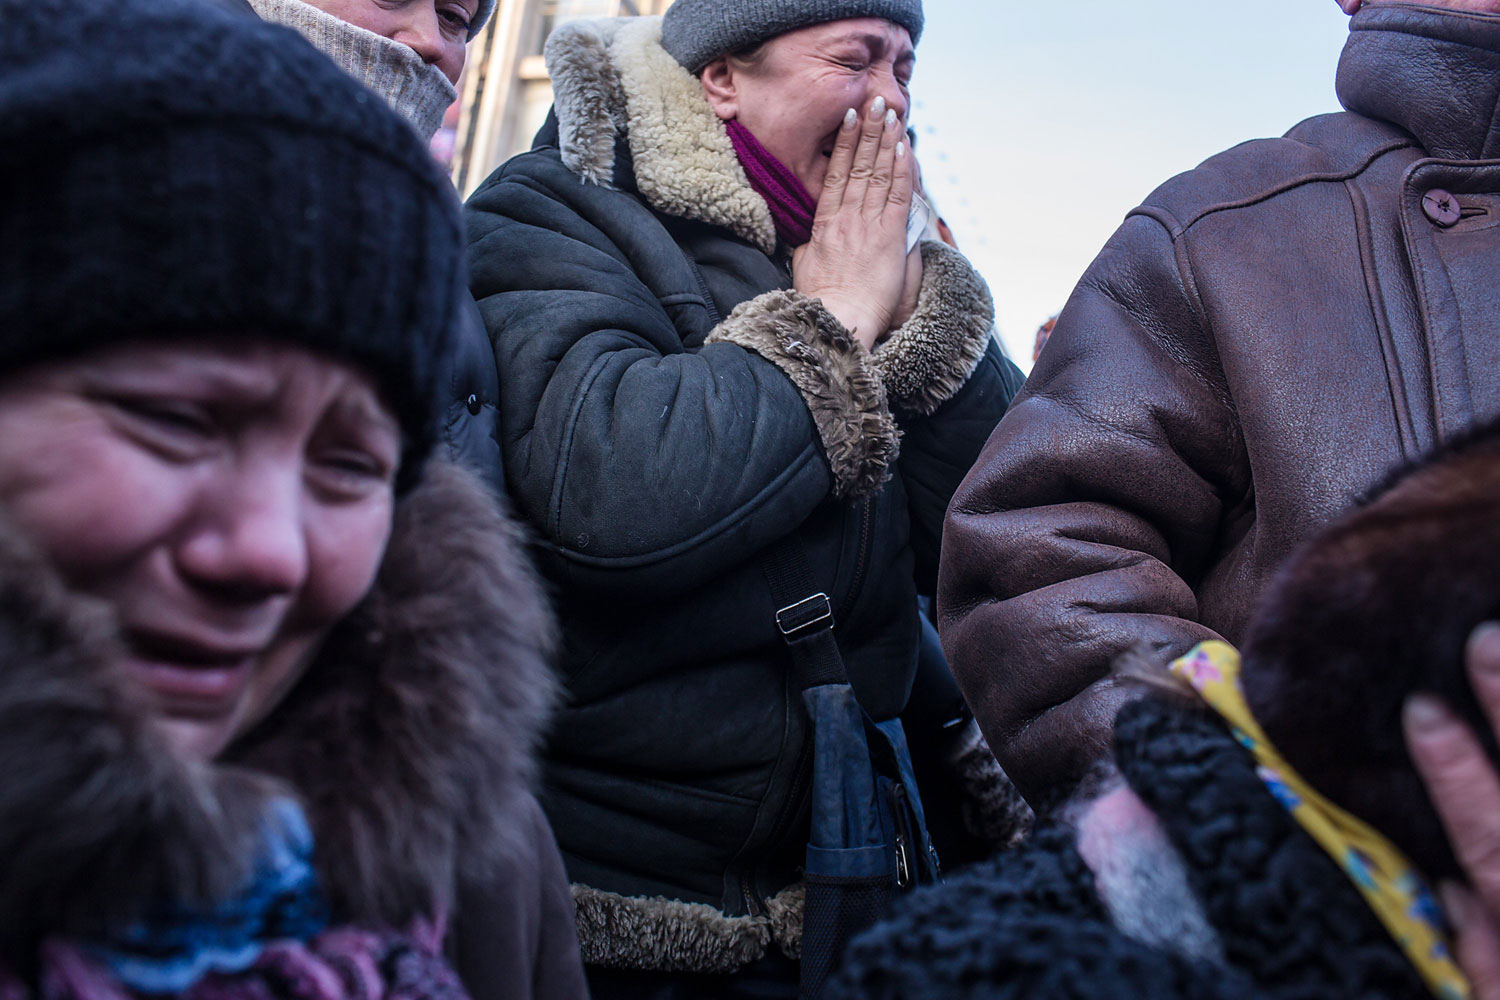 Women weep as a casket containing the body of Mikhail Zhiznevsky, 25, an anti-government protester who was killed in clashes with police, is carried past on Jan. 26, 2014 in Kiev.